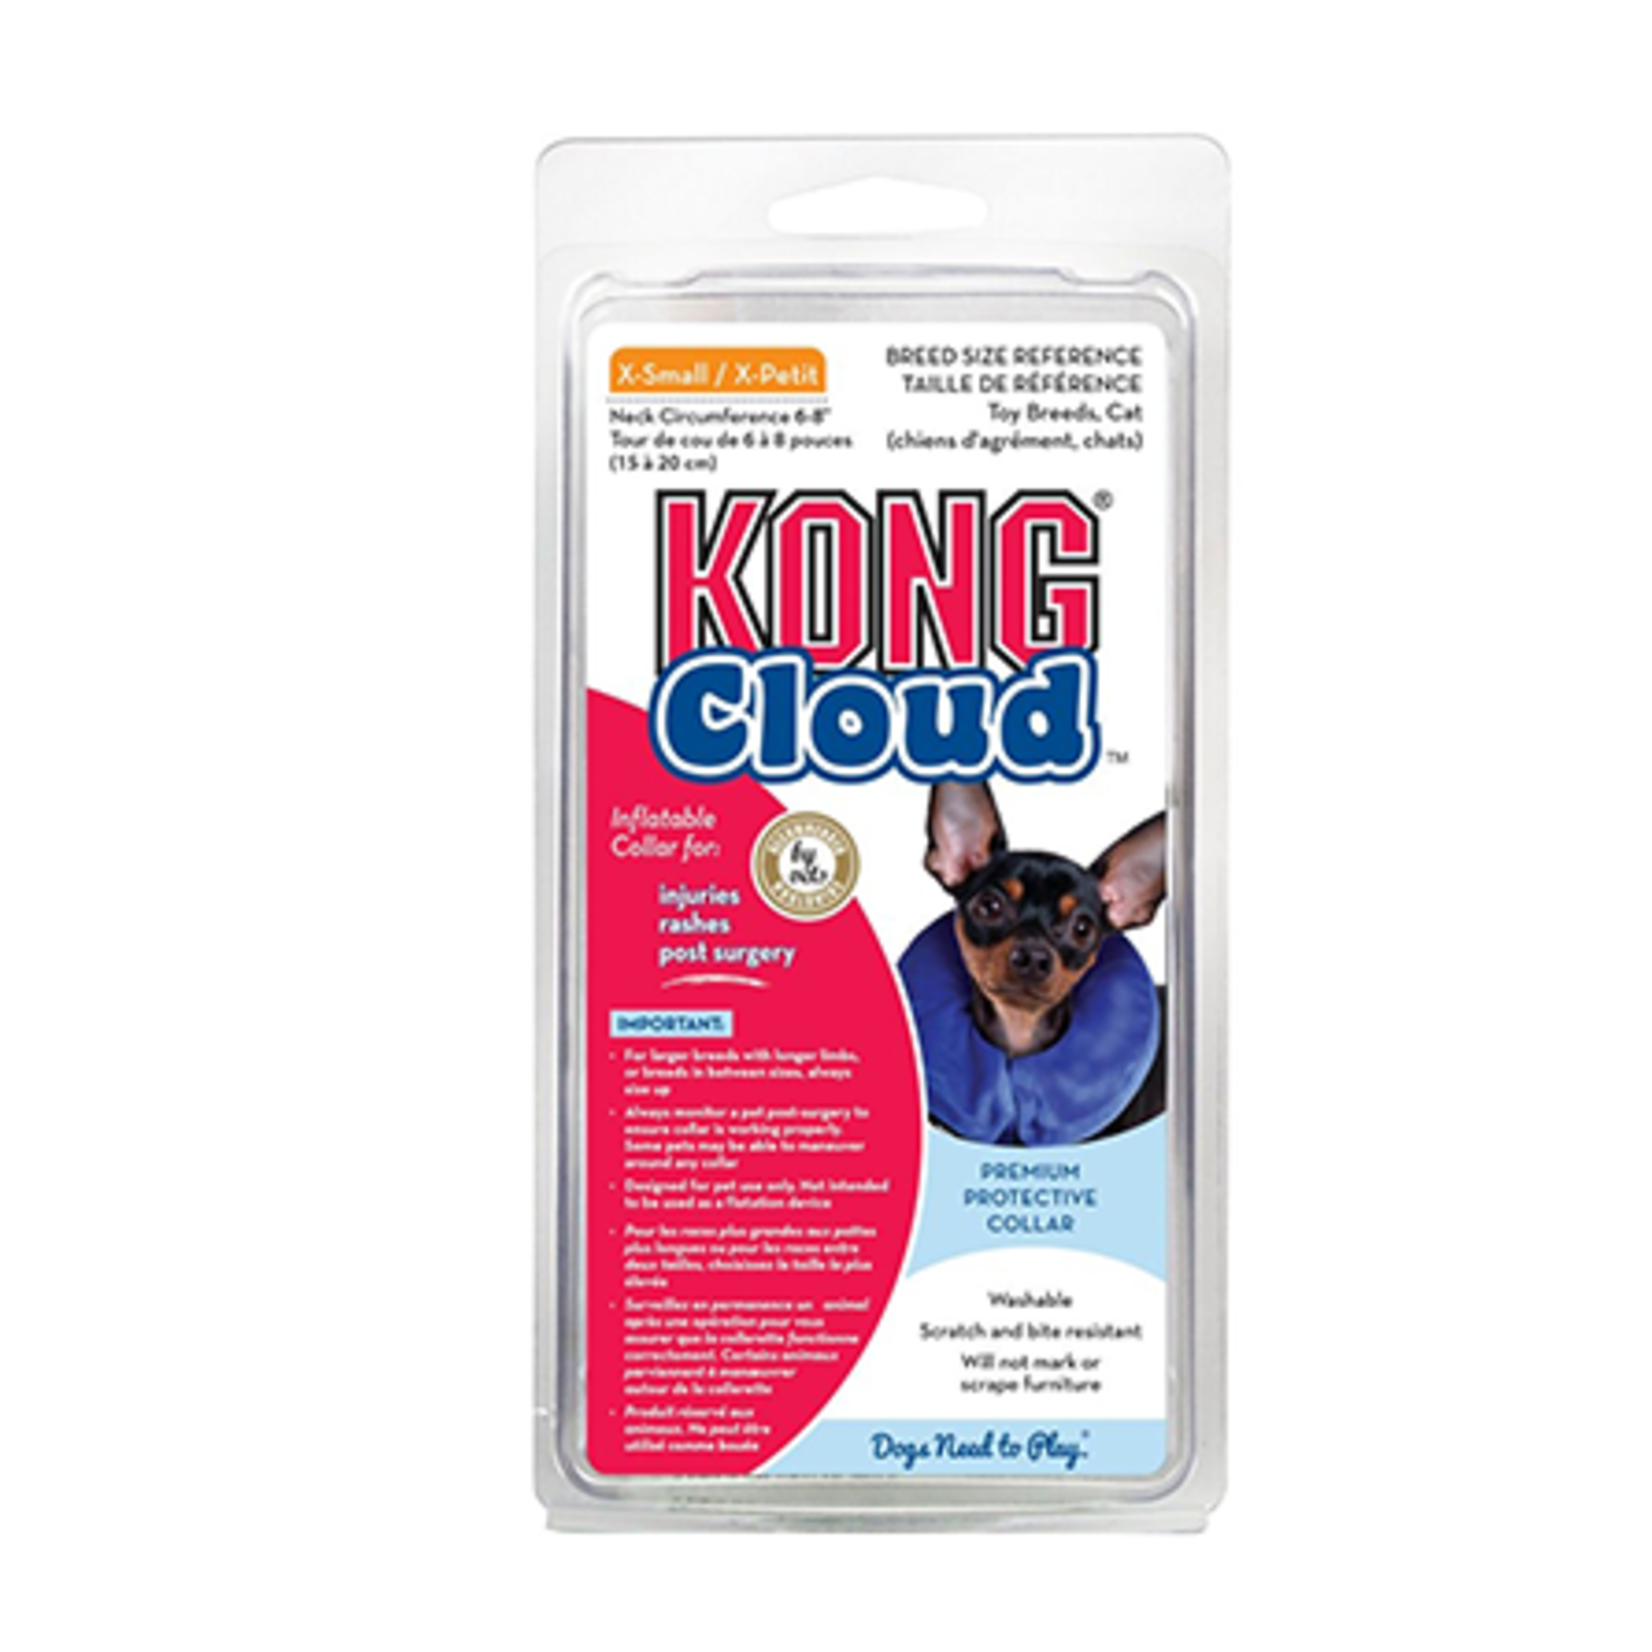 Kong Cloud Collar for Dogs